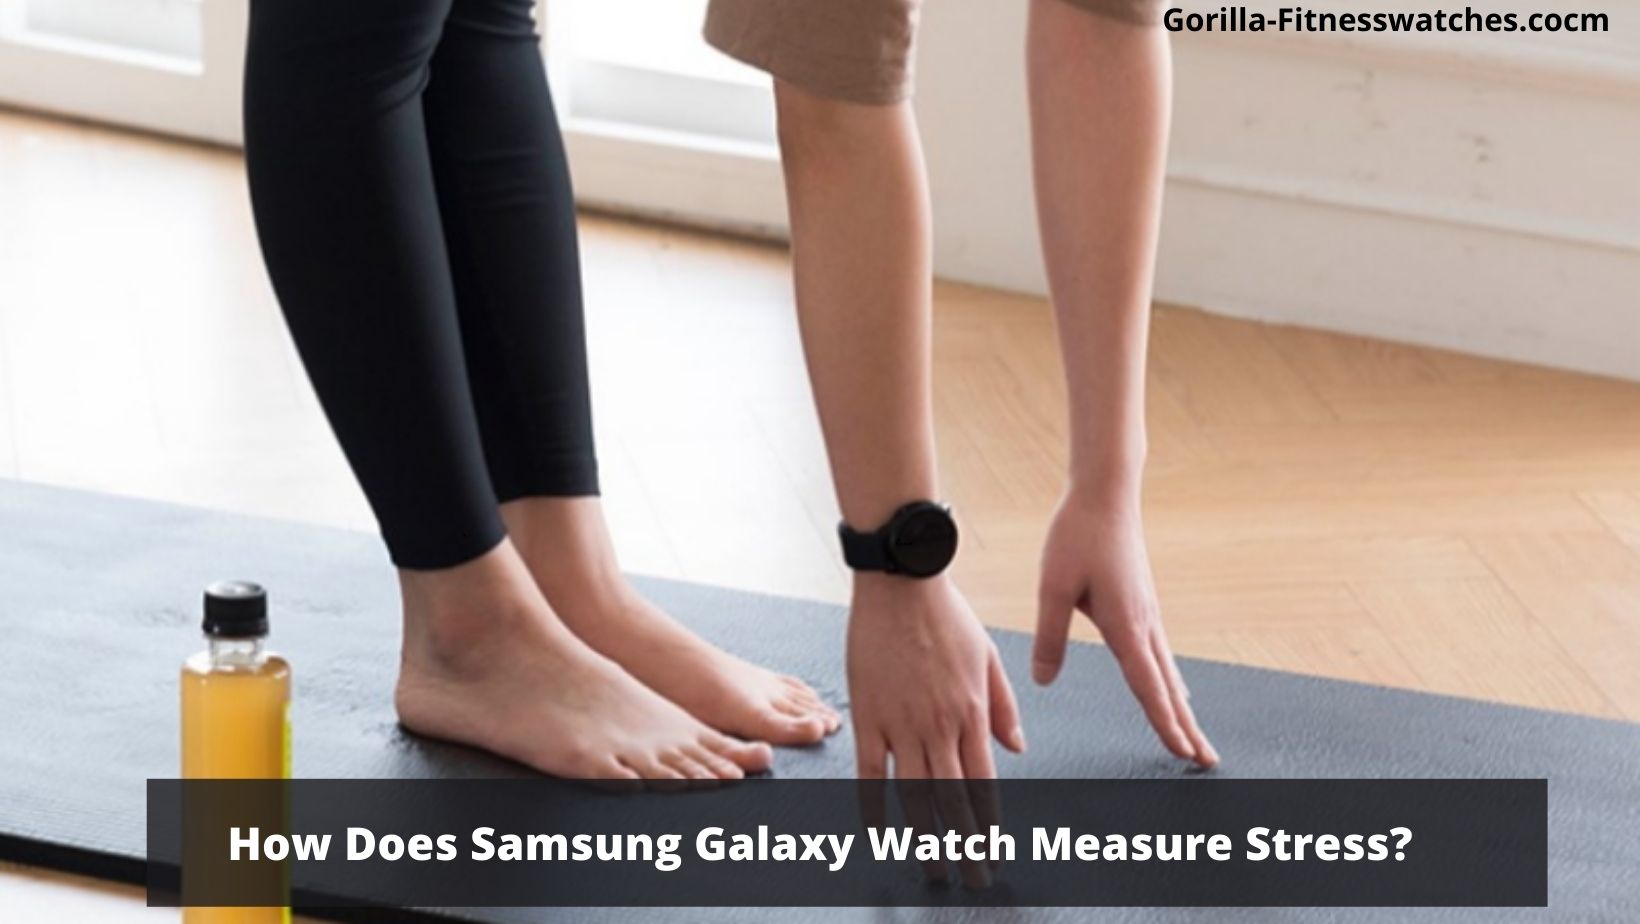 How Does Samsung Galaxy Watch Measure Stress?